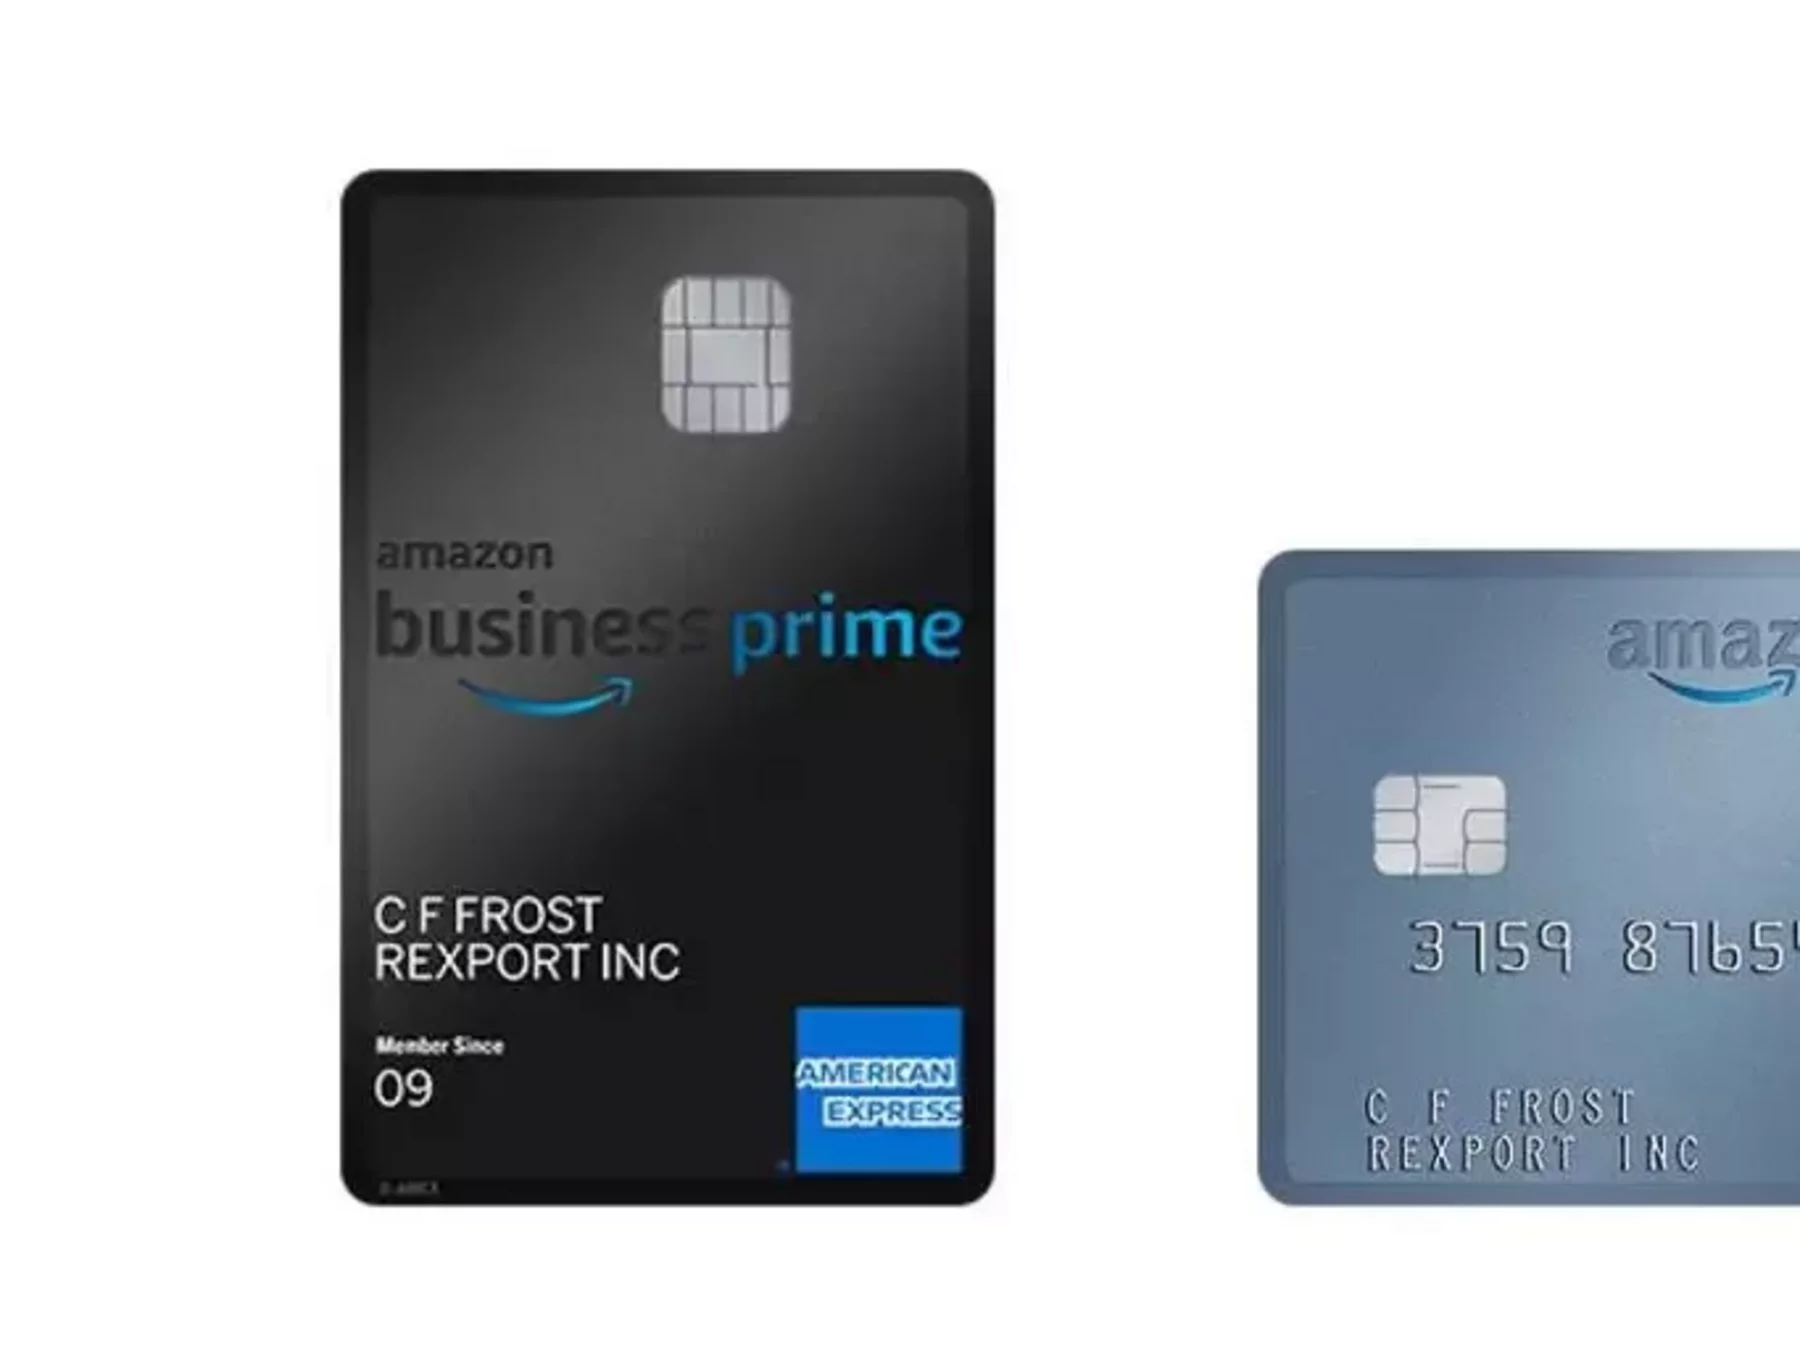 What Is Amazon Business Prime?